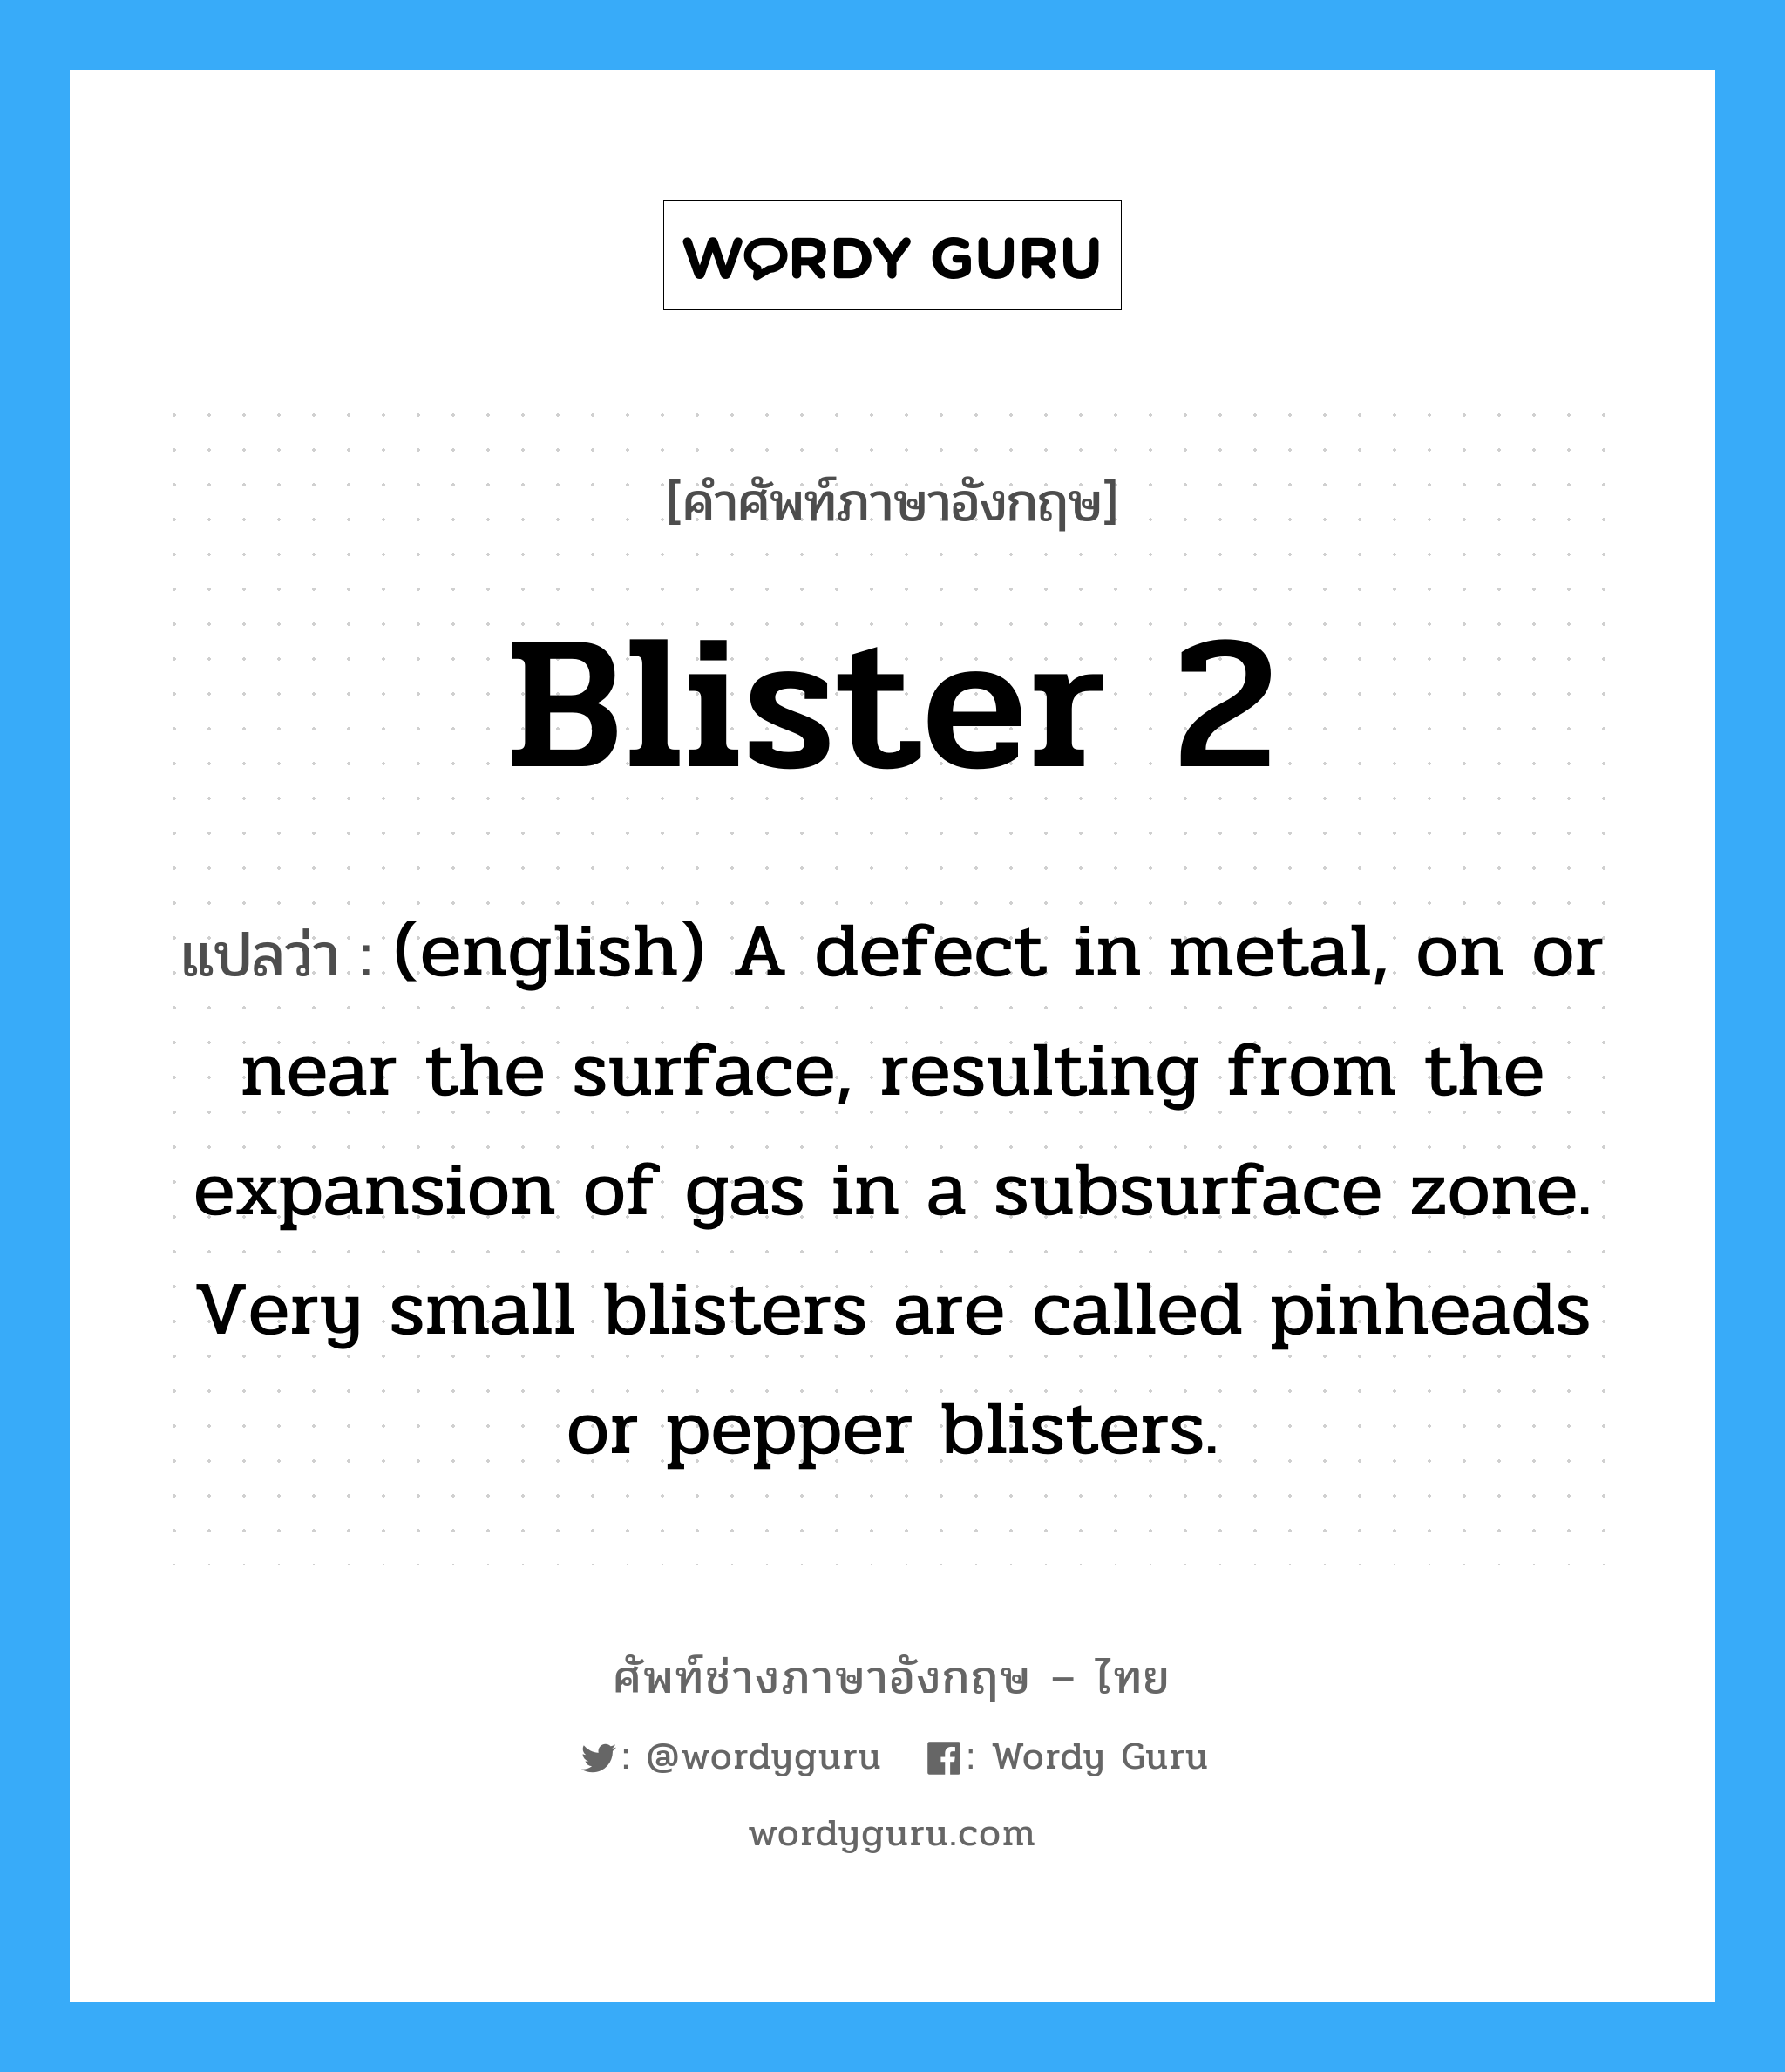 (english) A defect in metal, on or near the surface, resulting from the expansion of gas in a subsurface zone. Very small blisters are called pinheads or pepper blisters. ภาษาอังกฤษ?, คำศัพท์ช่างภาษาอังกฤษ - ไทย (english) A defect in metal, on or near the surface, resulting from the expansion of gas in a subsurface zone. Very small blisters are called pinheads or pepper blisters. คำศัพท์ภาษาอังกฤษ (english) A defect in metal, on or near the surface, resulting from the expansion of gas in a subsurface zone. Very small blisters are called pinheads or pepper blisters. แปลว่า Blister 2